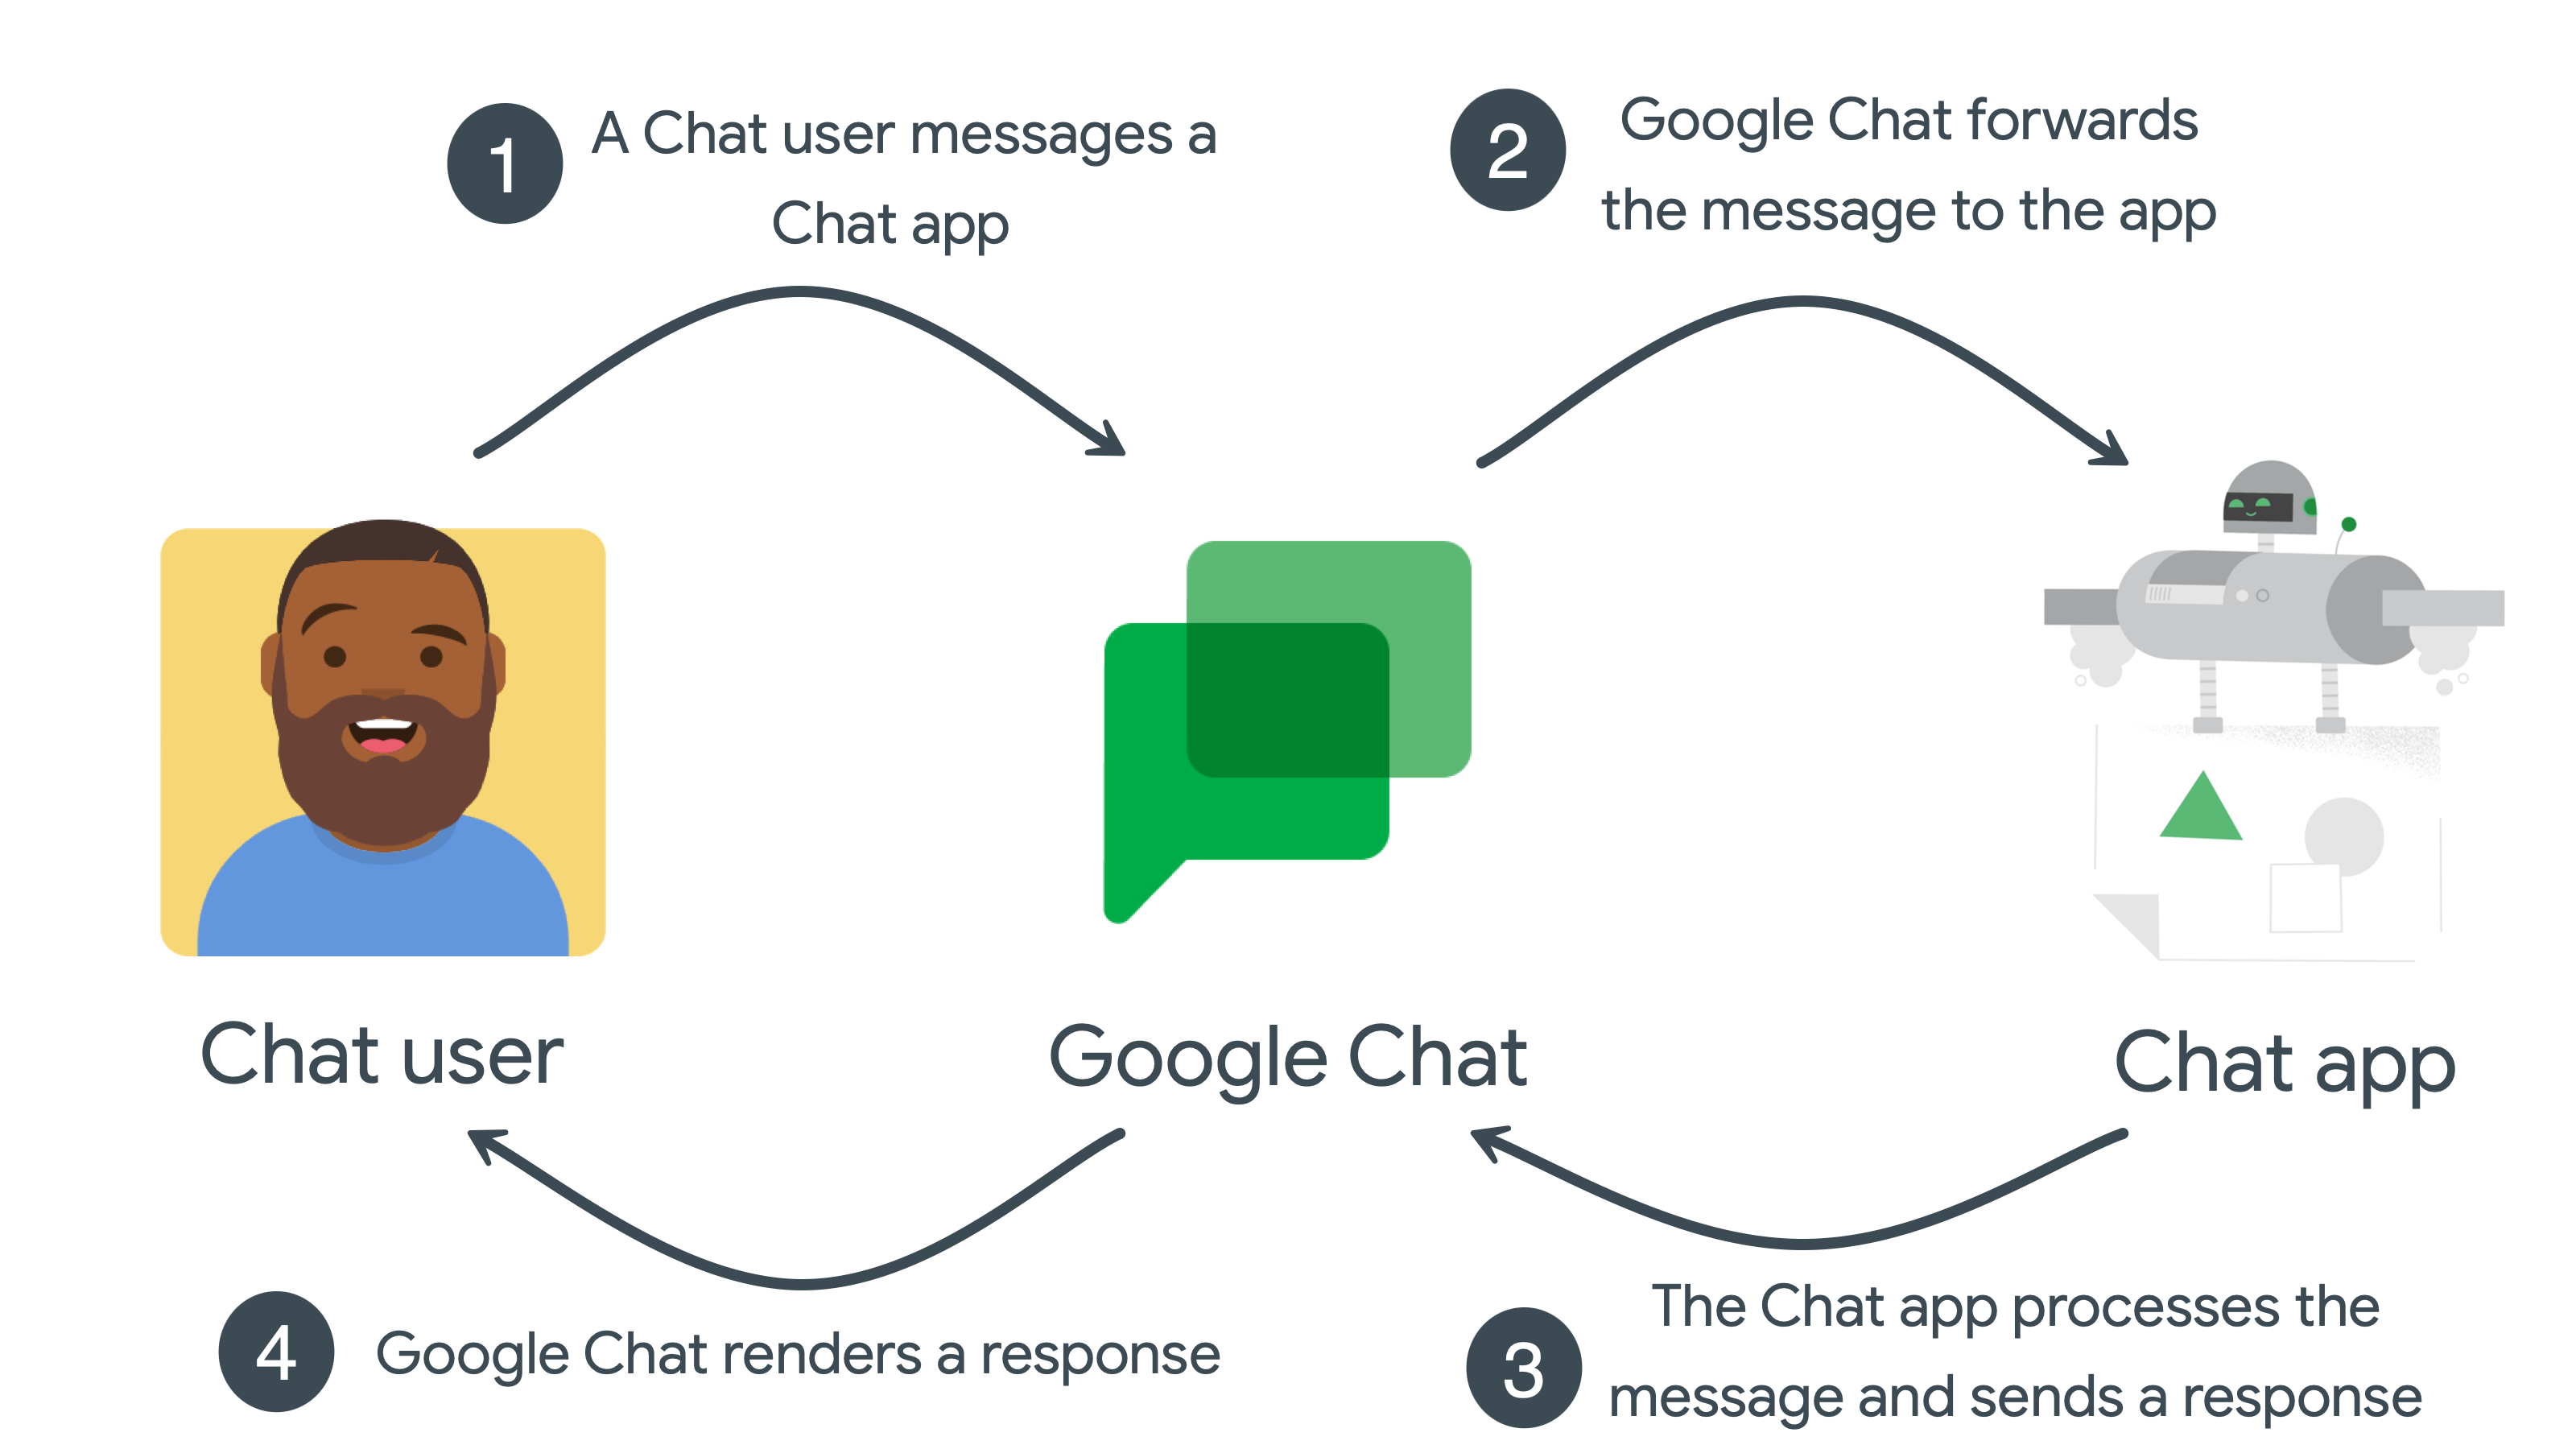 No authorization required for  Chat app interaction events